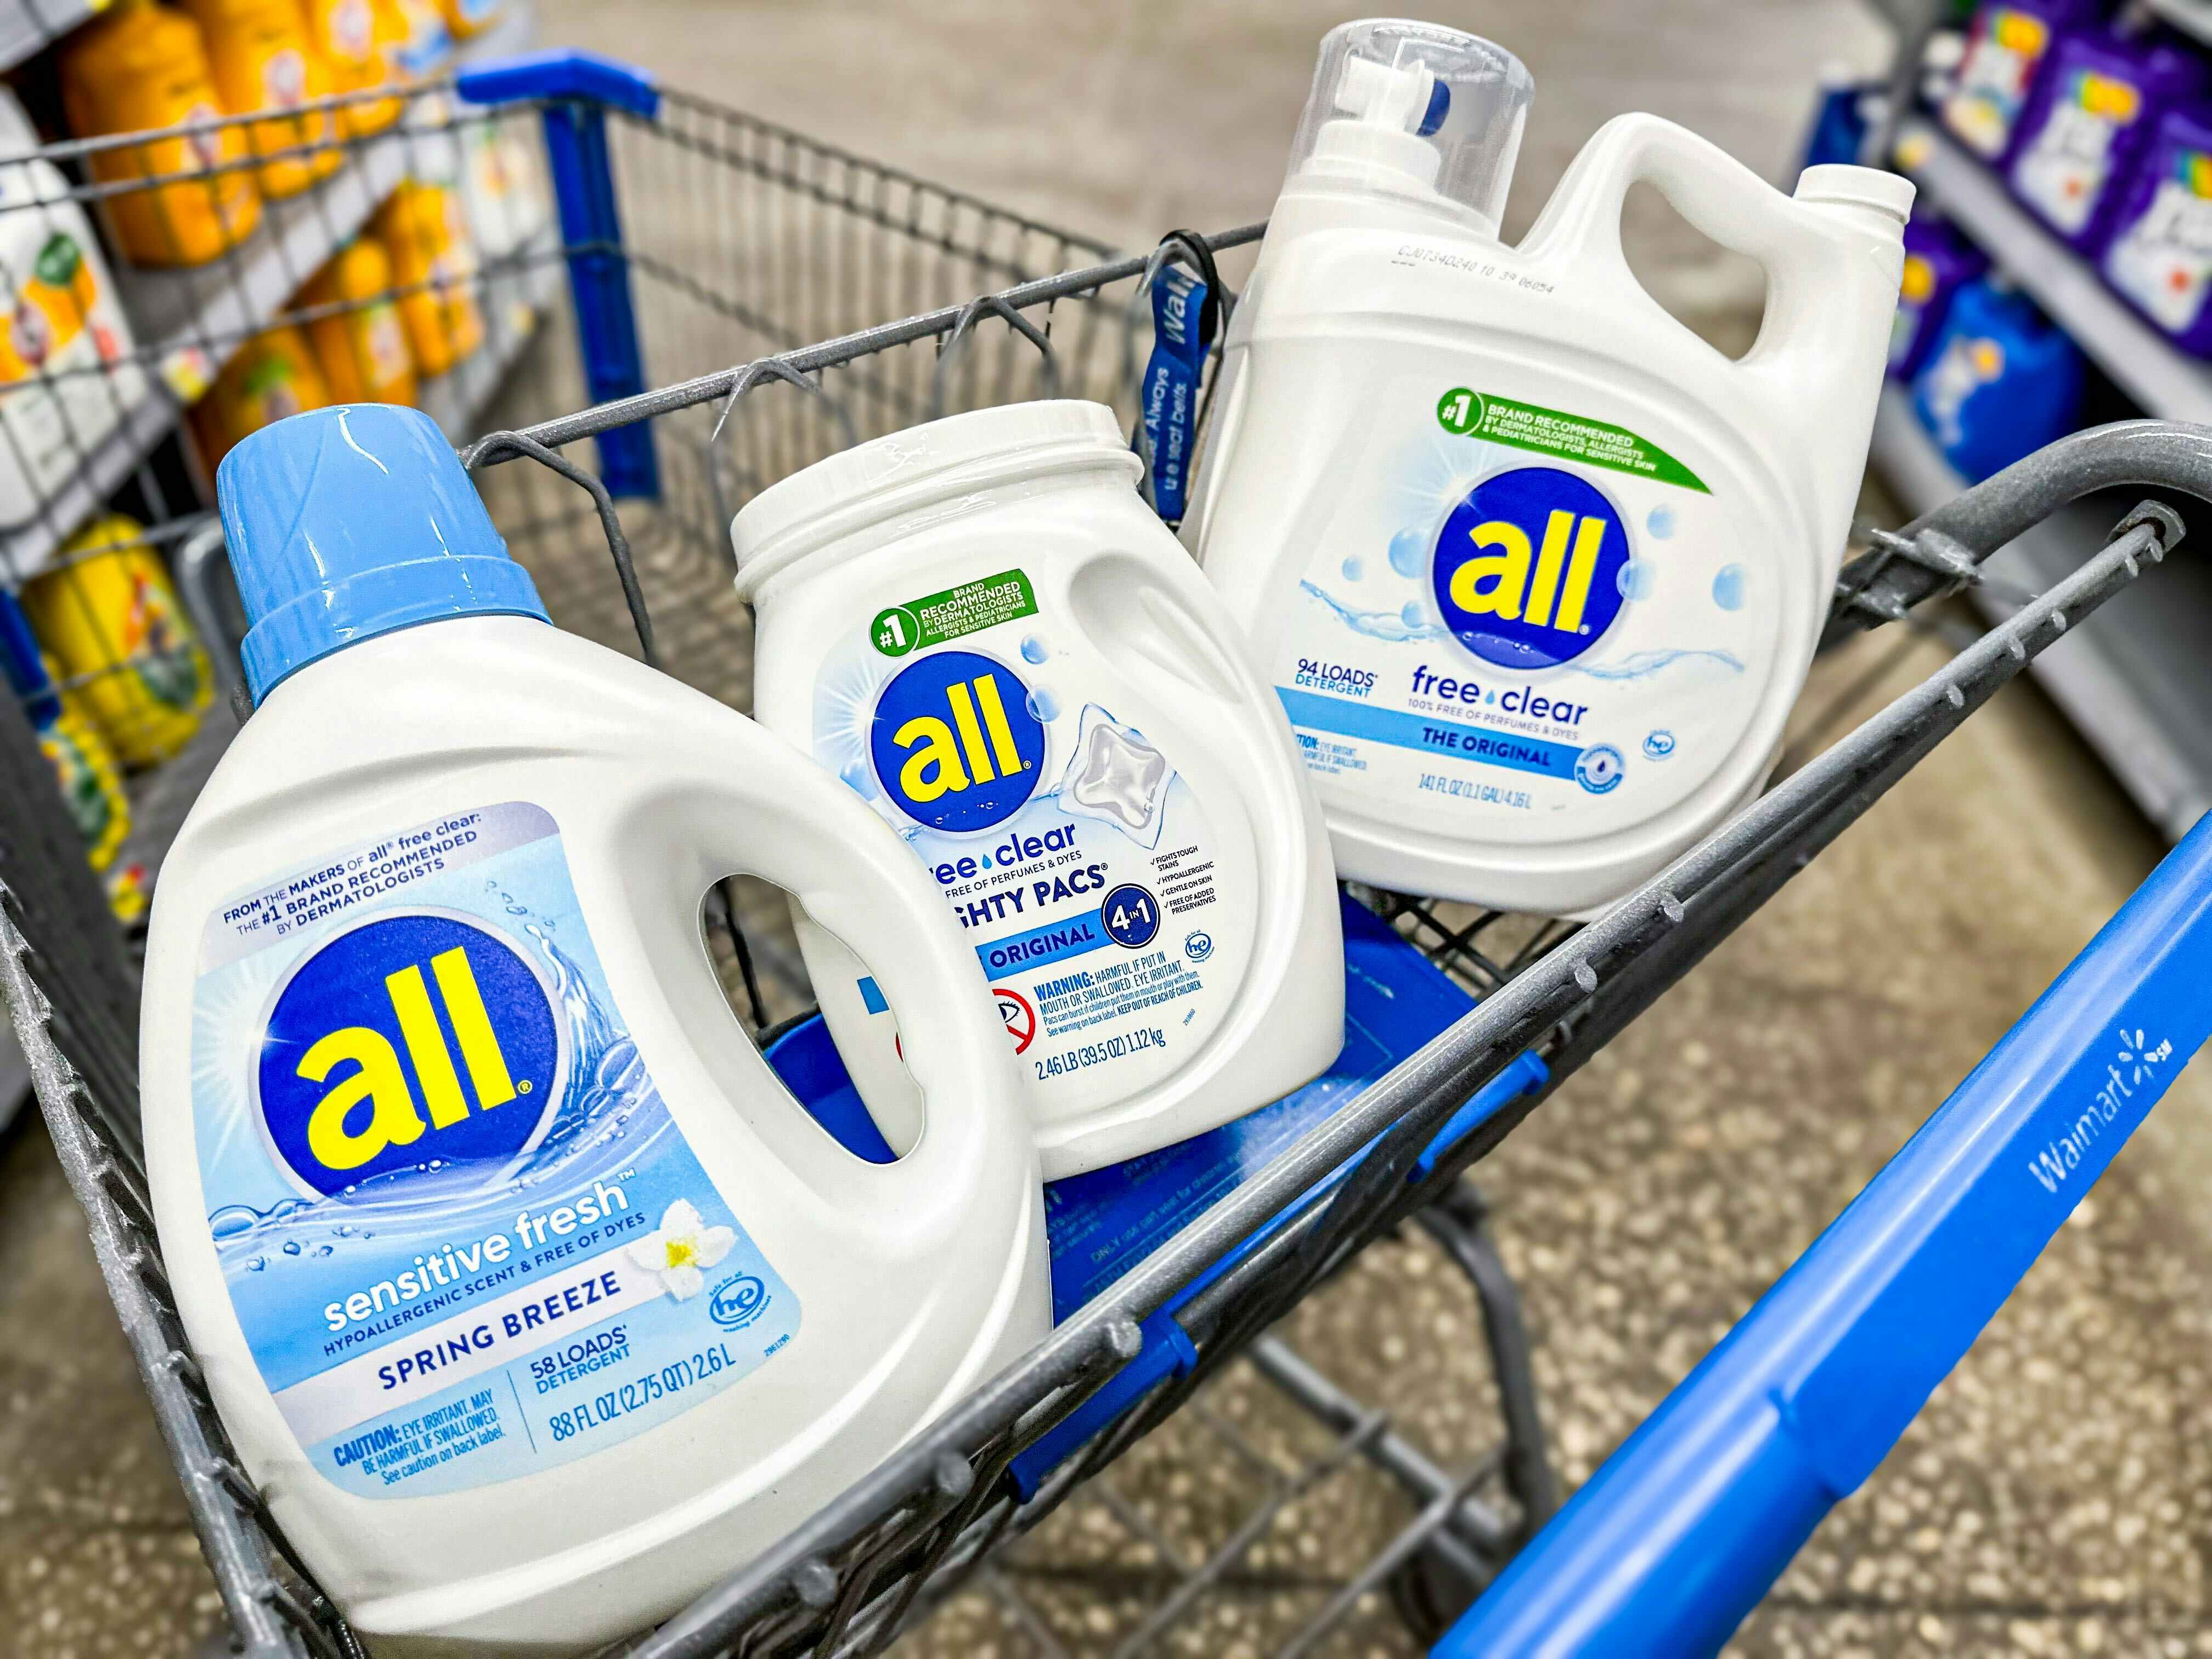 All Free Clear Detergent, as Low as $0.12 per Load at Walmart